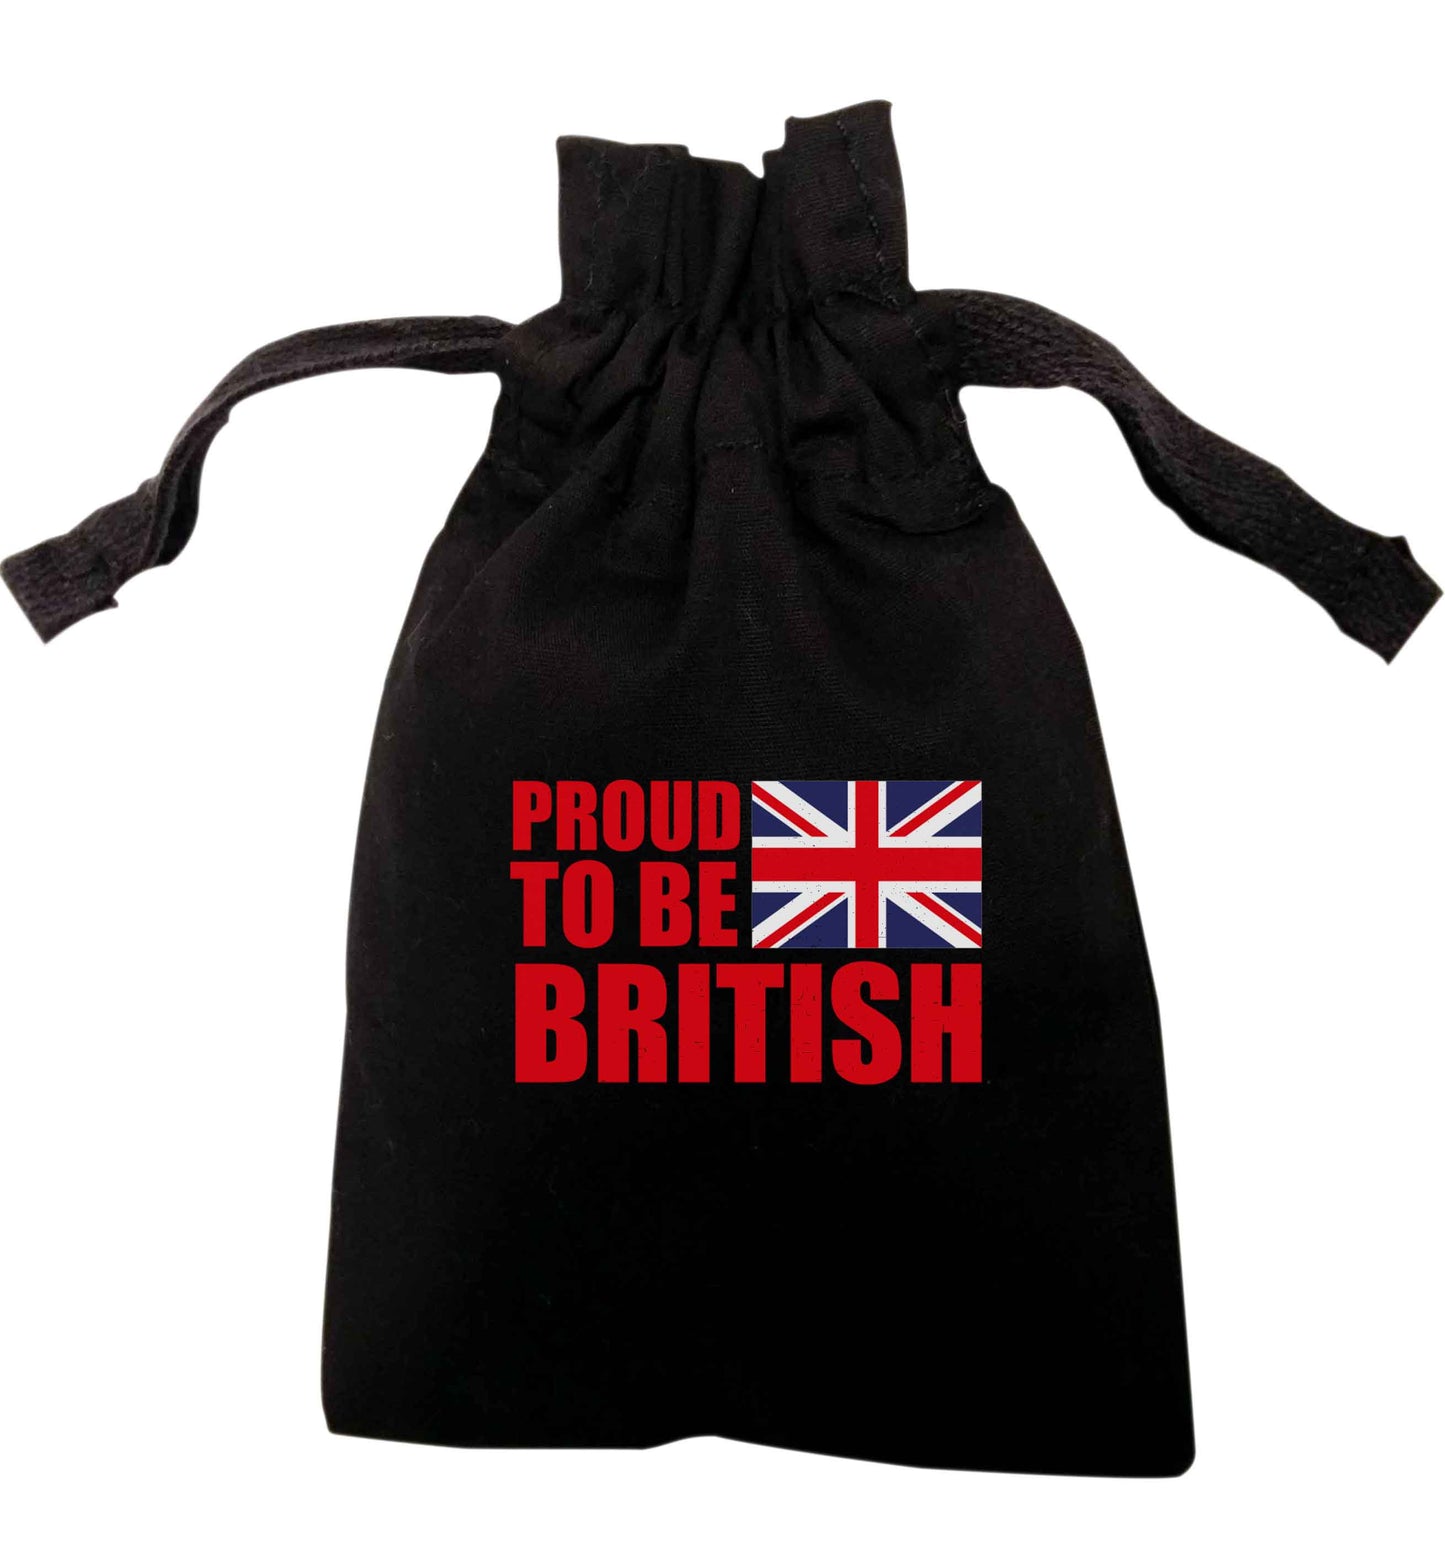 Proud to be British | XS - L | Pouch / Drawstring bag / Sack | Organic Cotton | Bulk discounts available!